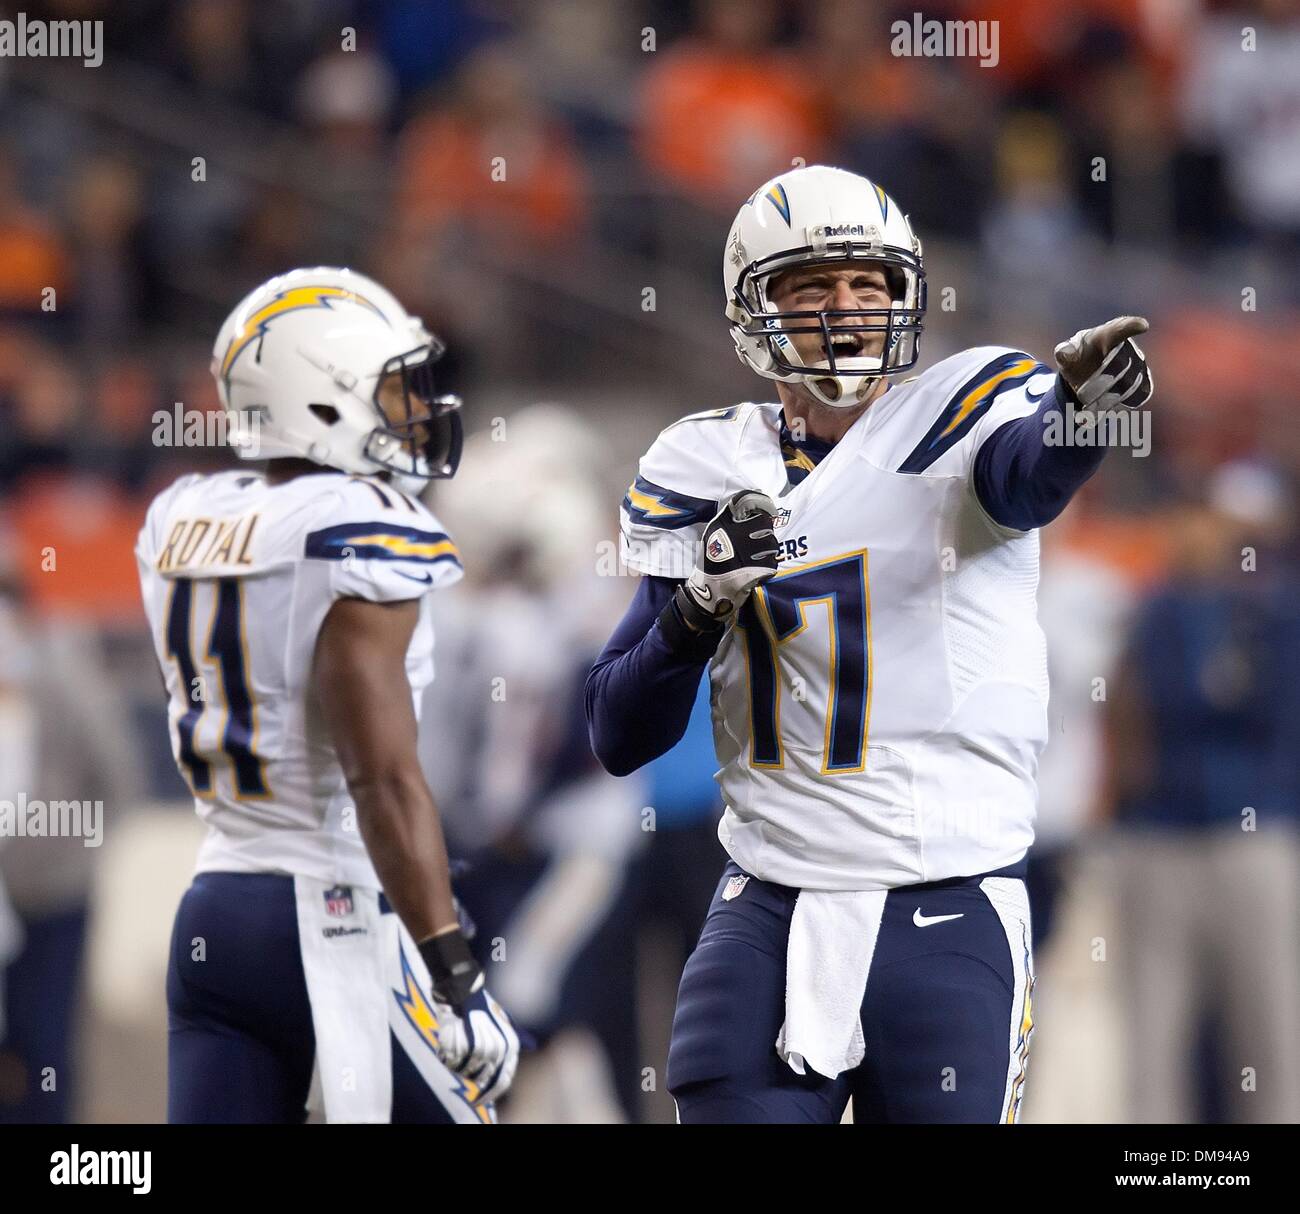 Denver, Colorado, USA. 12th Dec, 2013. Chargers QB PHILIP RIVERS, right, yells at a ref that he is being grabbed at after his pass completion during the first half at Sports Authority Field at Mile High Thursday evening. The Chargers beat the Broncos 27-20. Credit:  Hector Acevedo/ZUMAPRESS.com/Alamy Live News Stock Photo